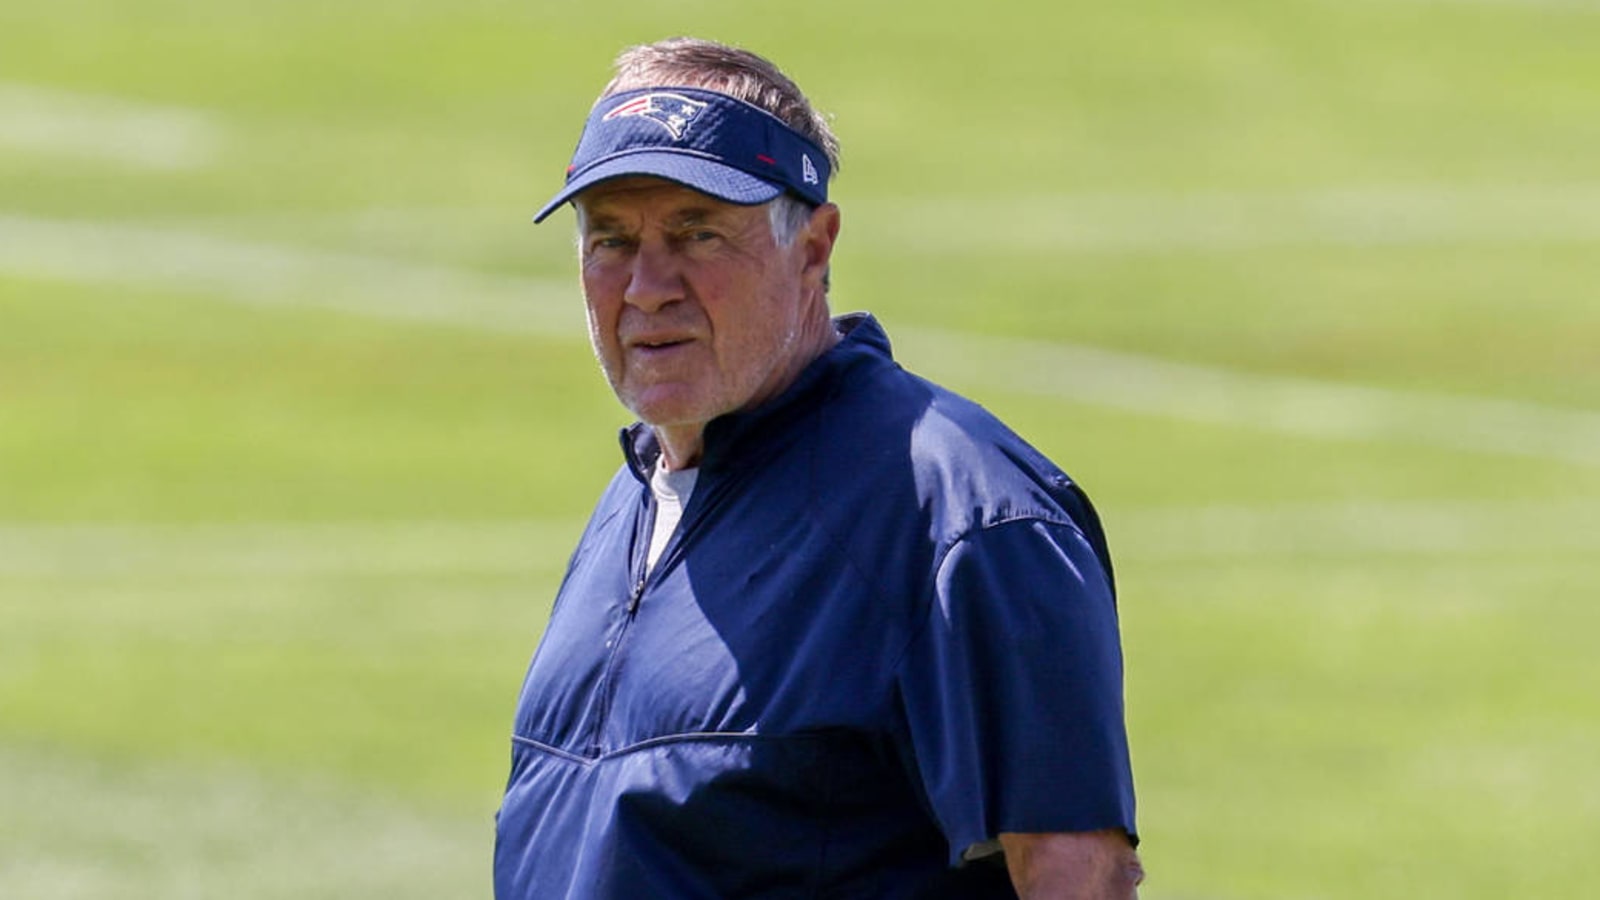 Belichick on Pats QBs: 'Competition makes us all better'